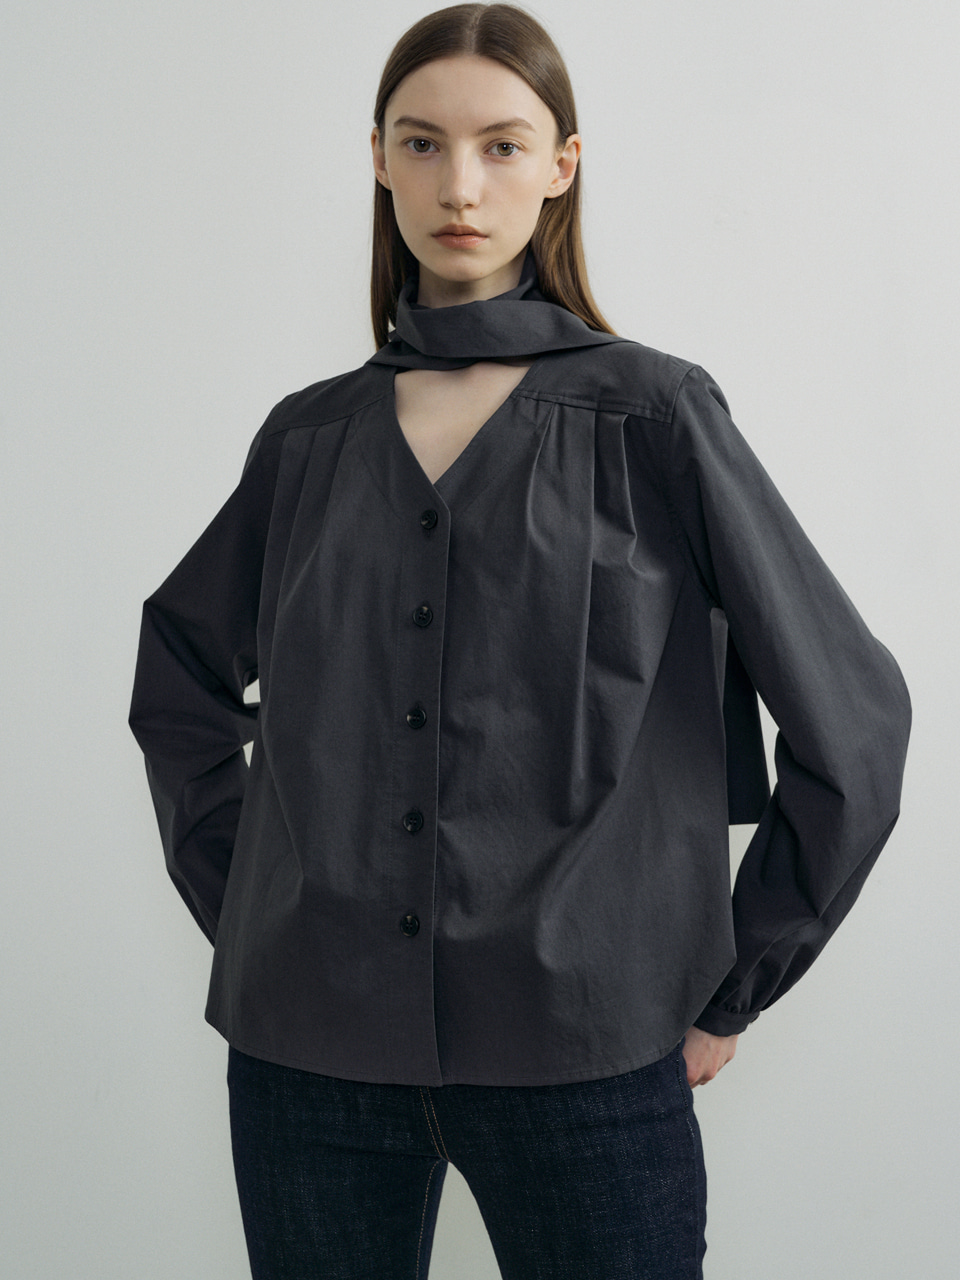 23FW TRENCH TIE BLOUSE (2color)